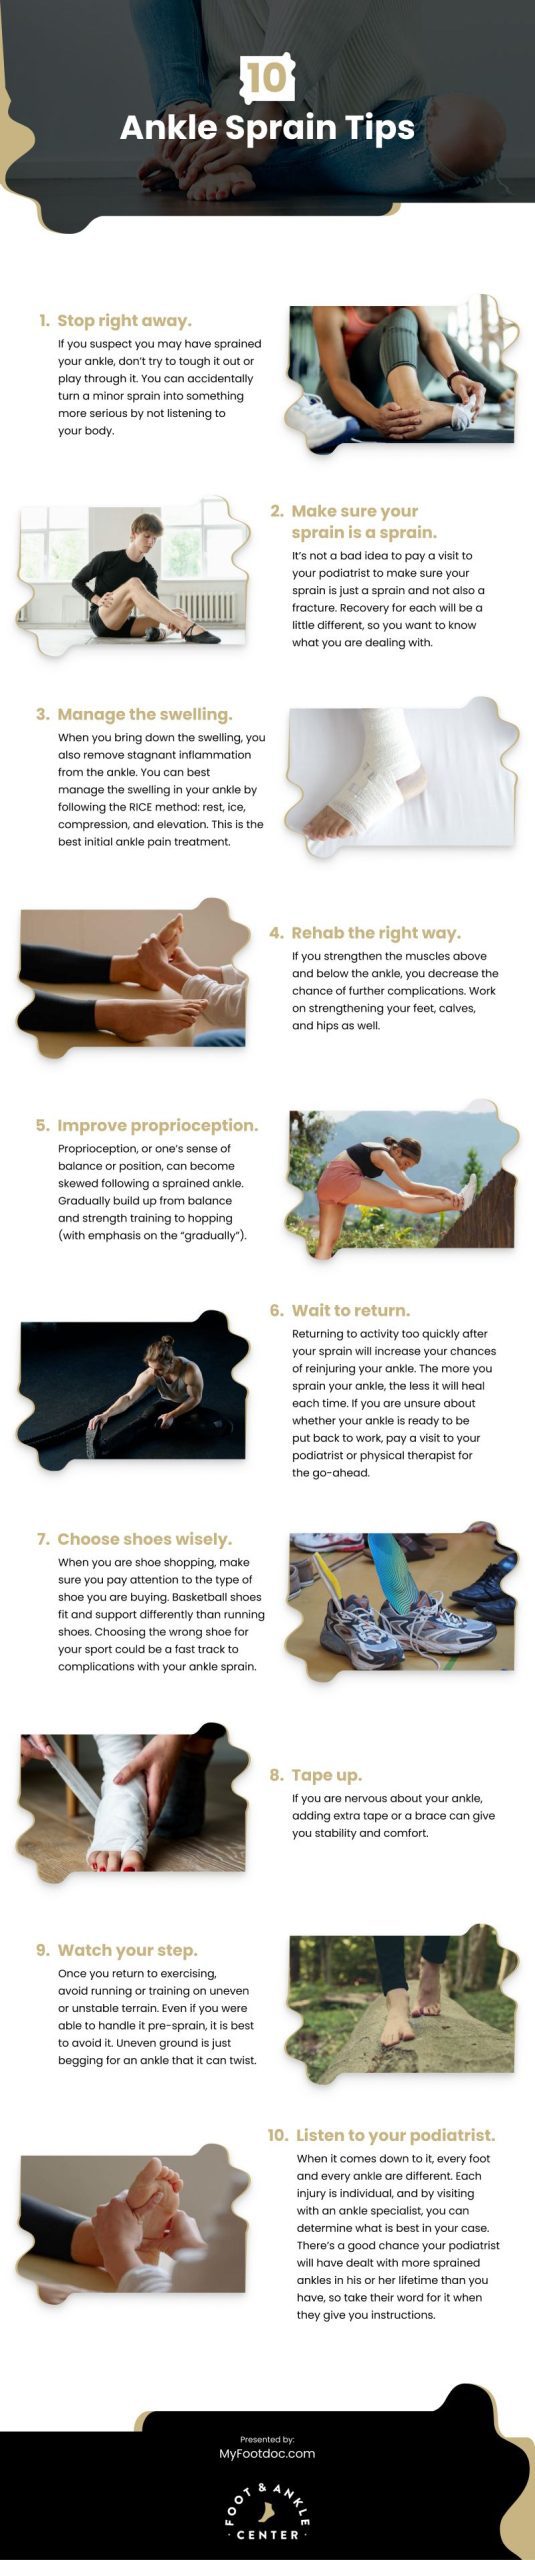 10 Ankle Sprain Tips Infographic